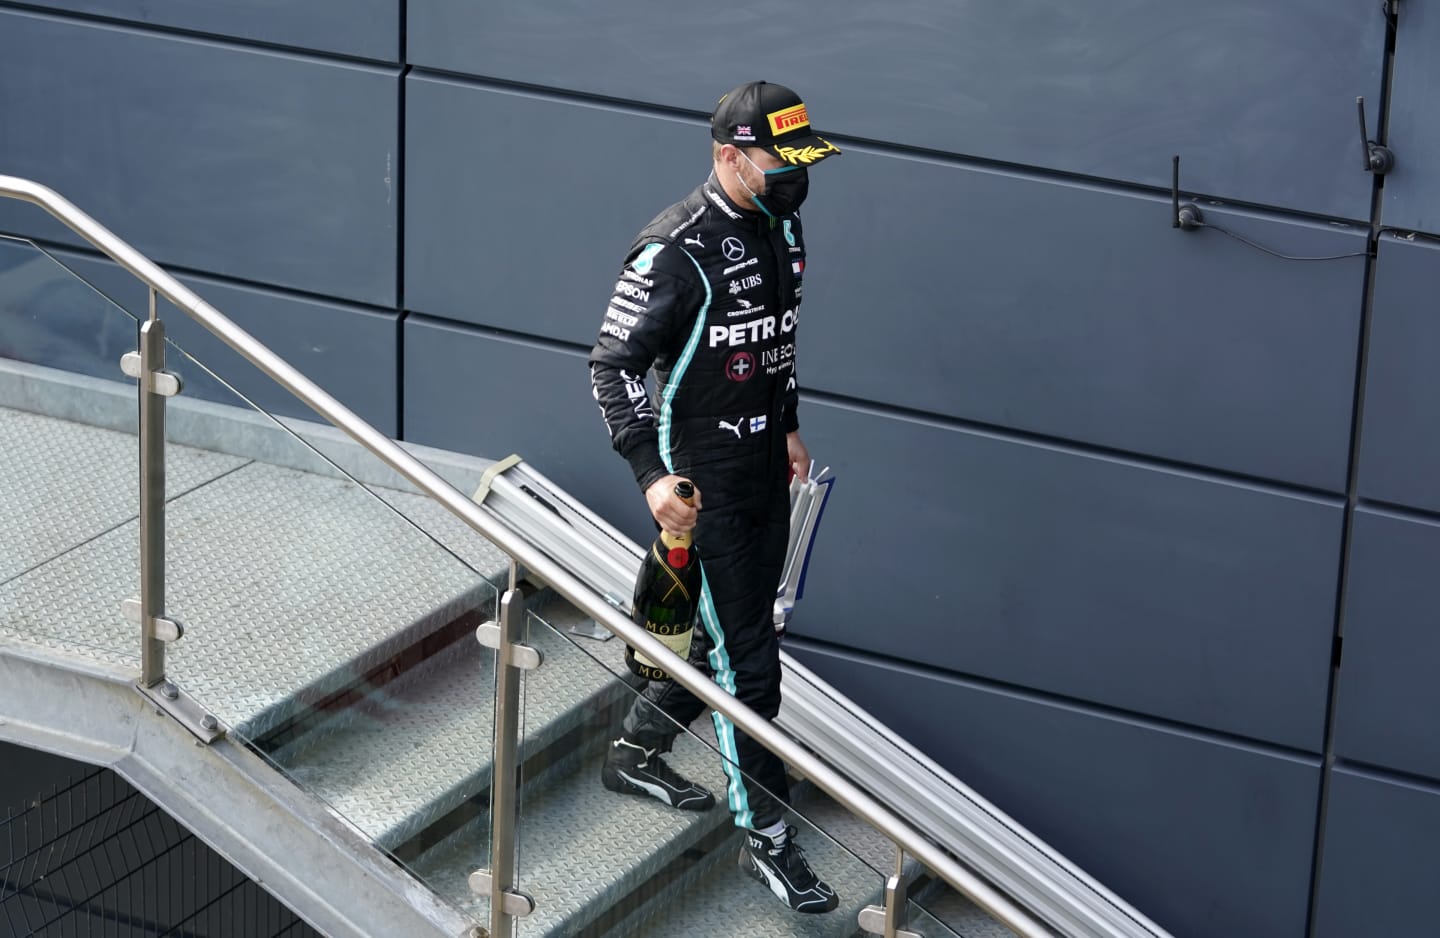 NORTHAMPTON, ENGLAND - AUGUST 09: Third placed Valtteri Bottas of Finland and Mercedes GP walks with his trophy during the F1 70th Anniversary Grand Prix at Silverstone on August 09, 2020 in Northampton, England. (Photo by Will Oliver/Pool via Getty Images)